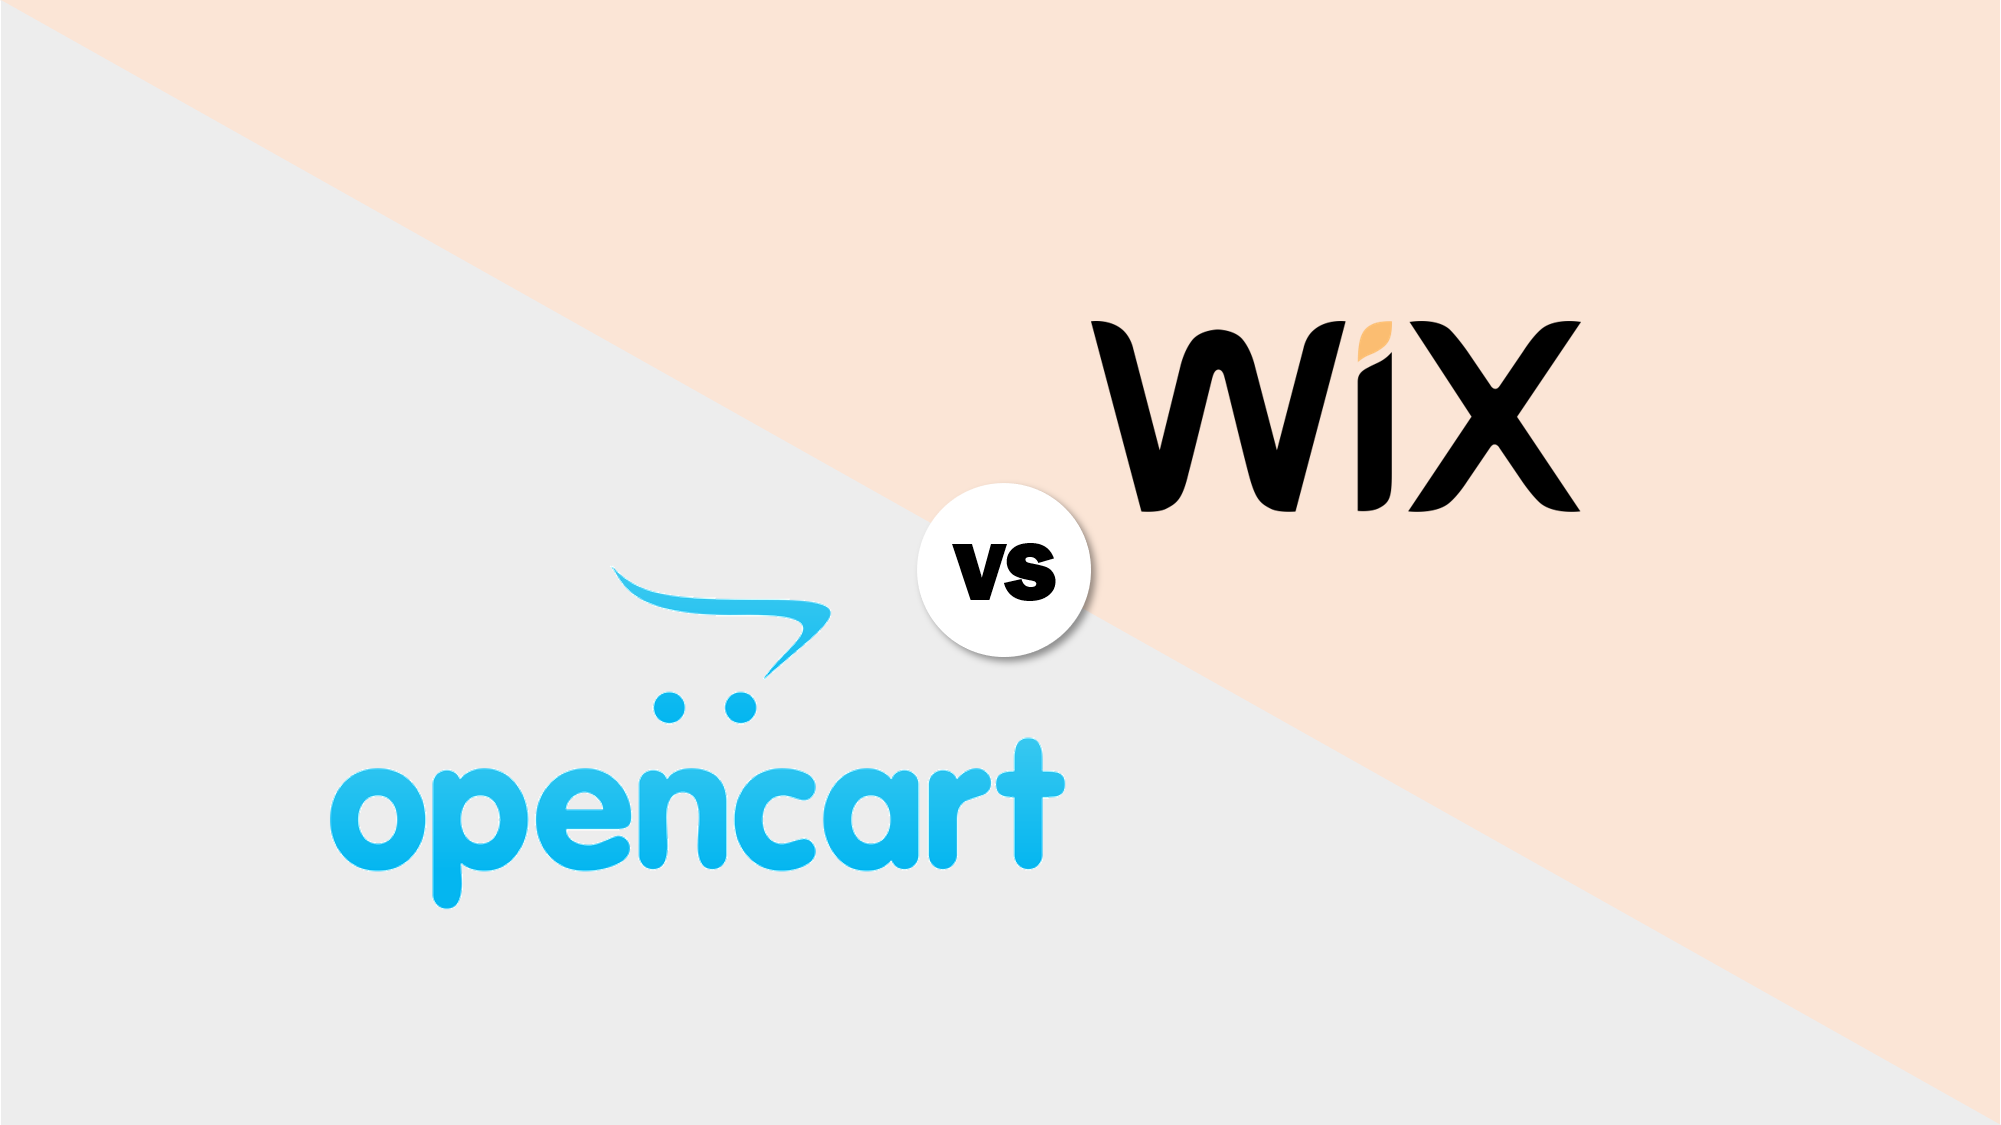 Wix vs OpenCart: Which is Better for SMEs